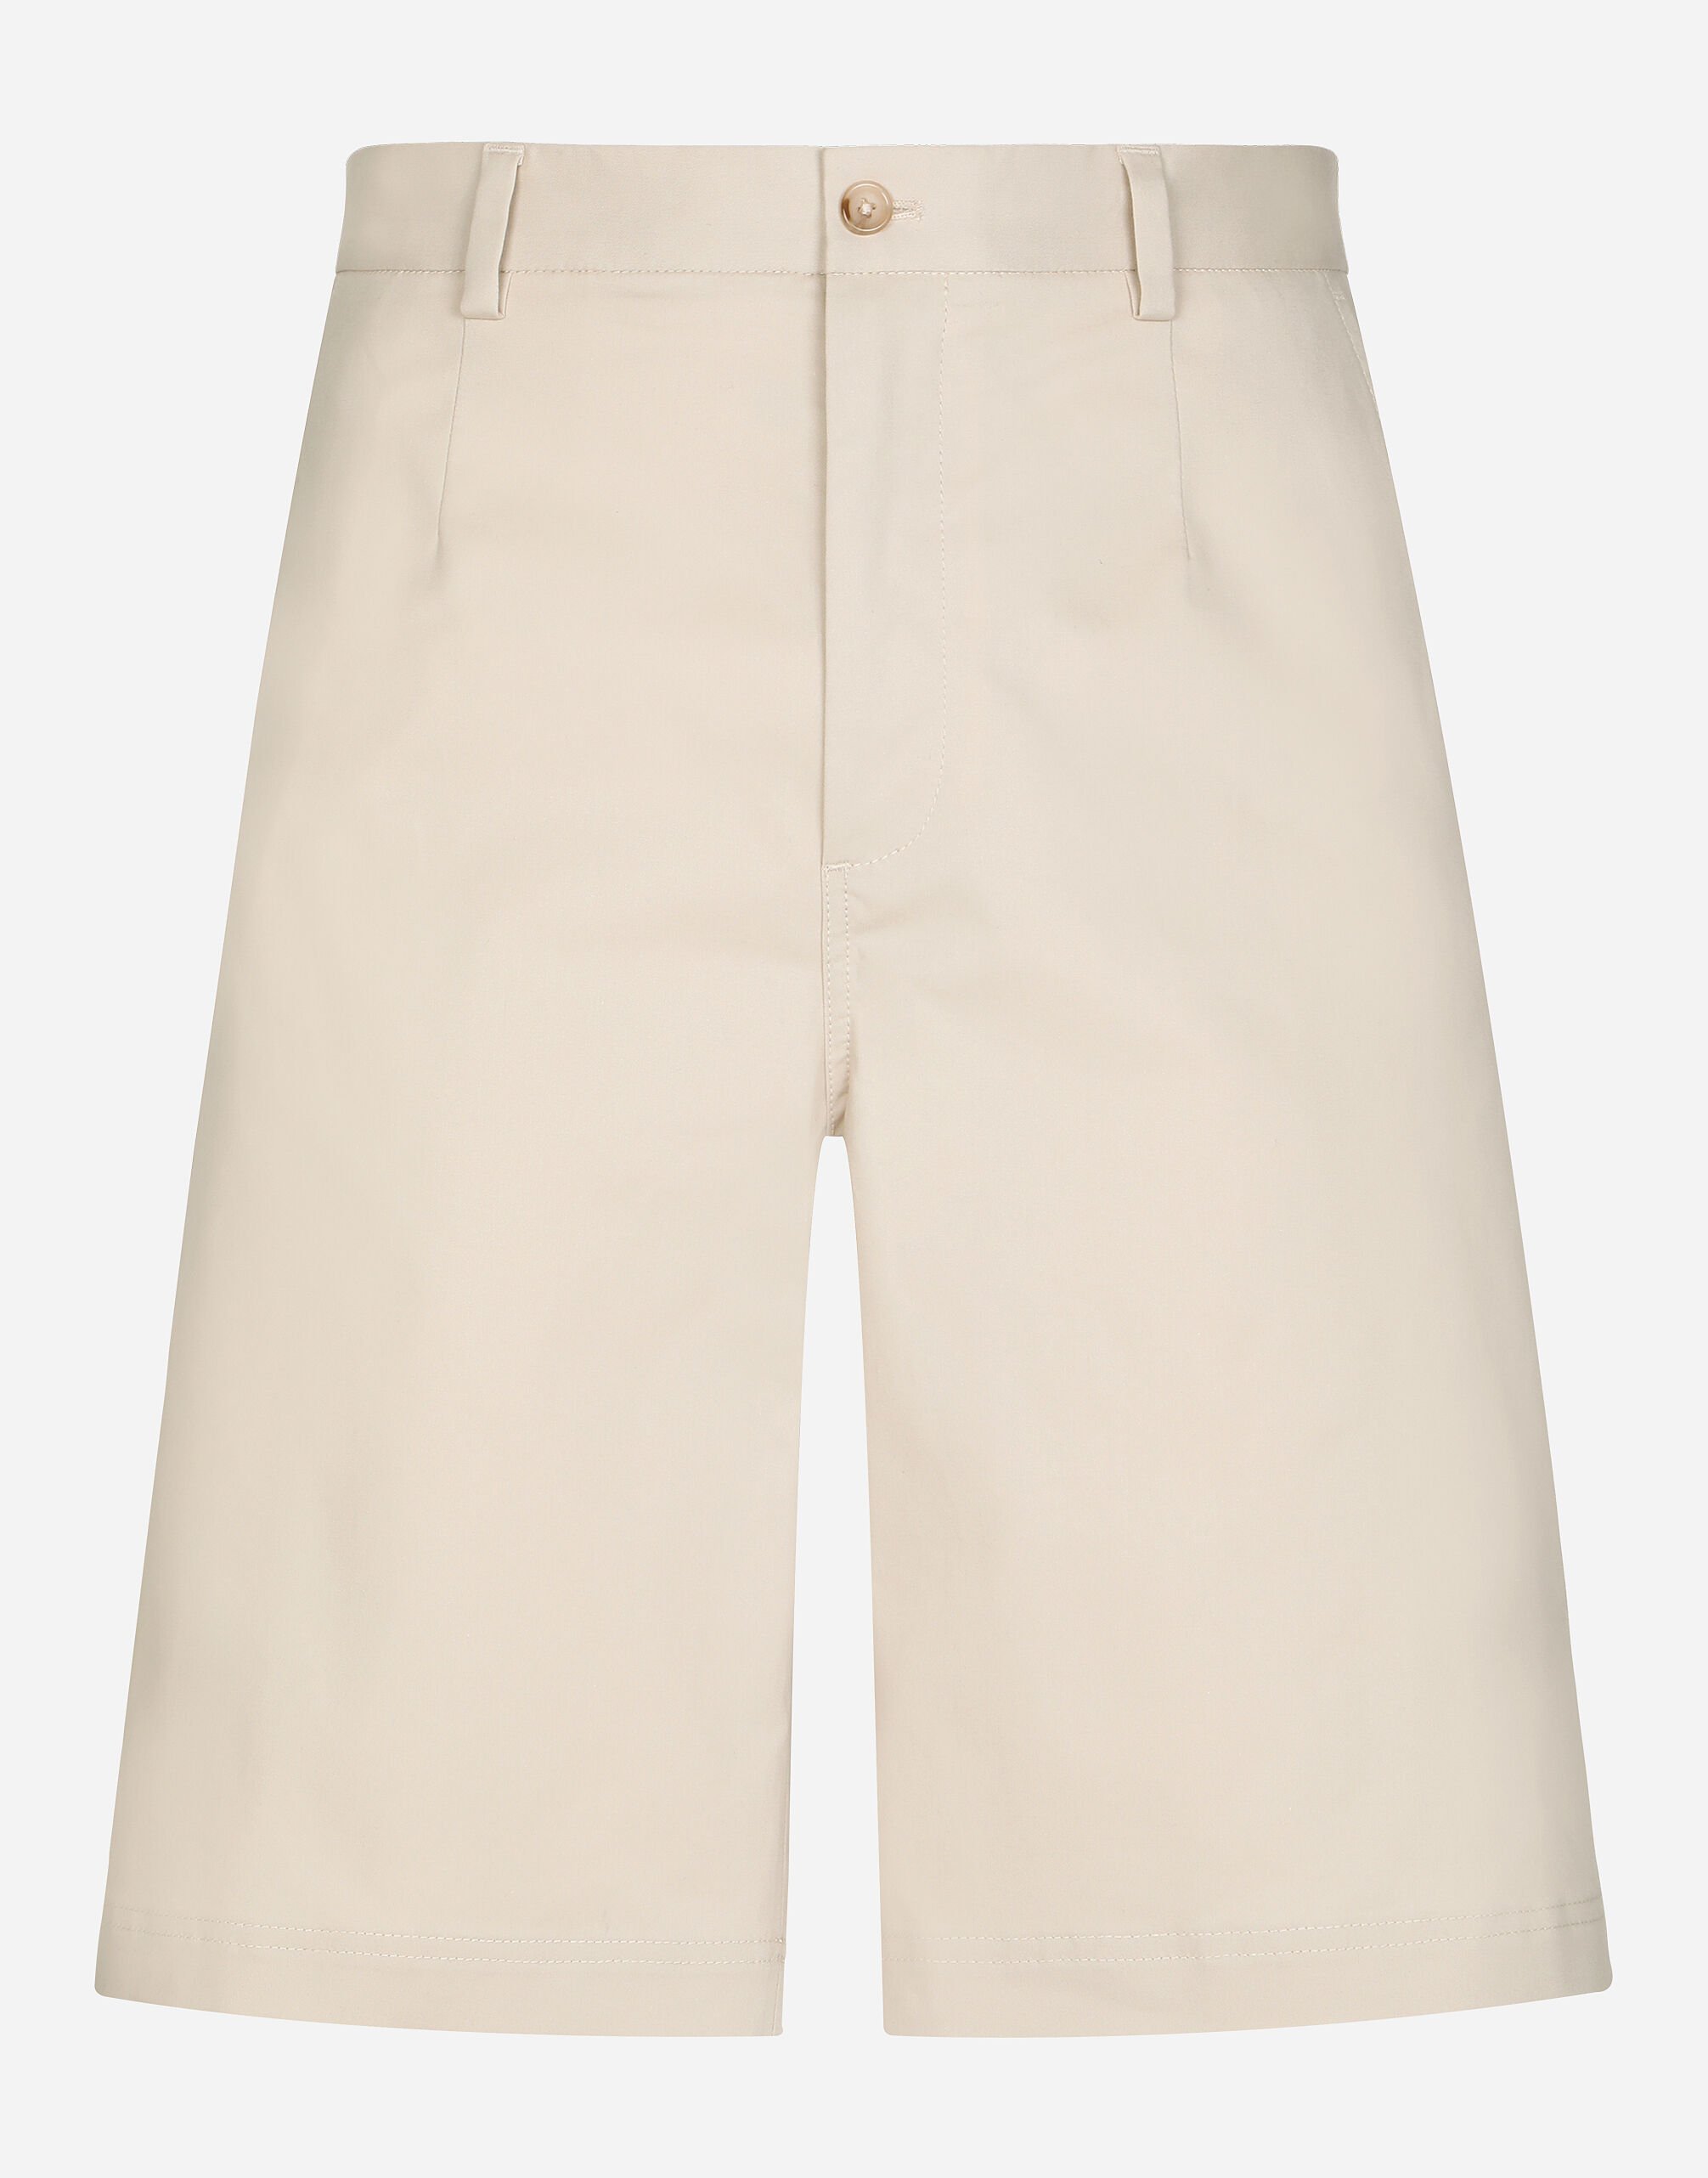 Dolce & Gabbana Stretch cotton shorts with branded tag Beige BM2275AO727